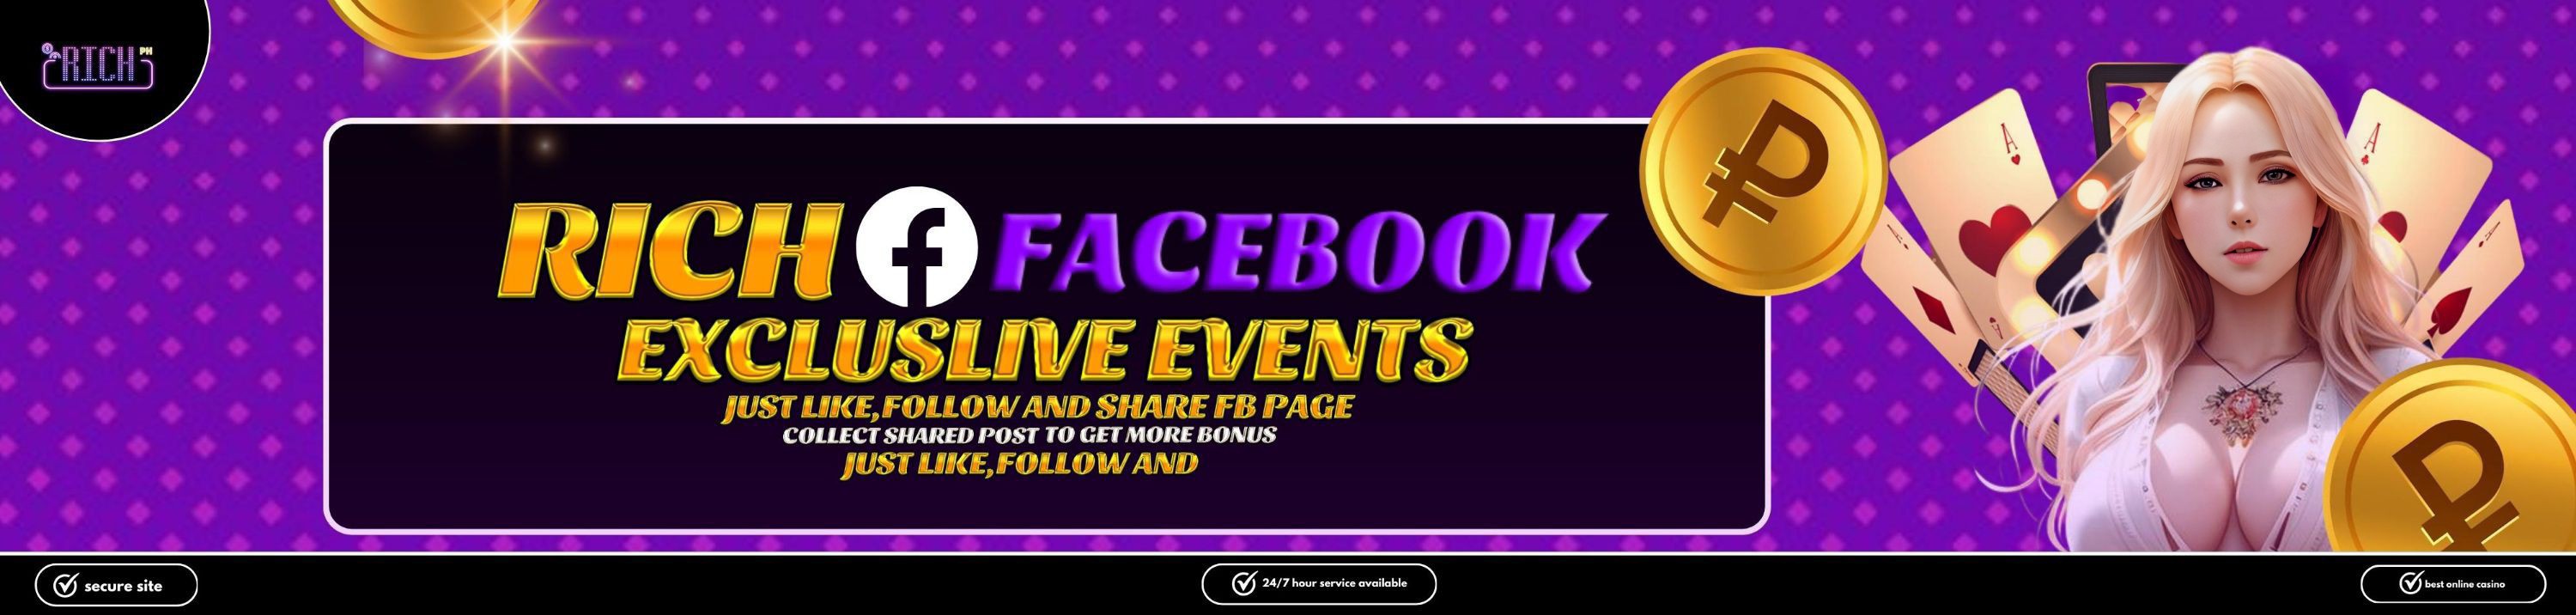 richph-facebook-events-promotional-banner